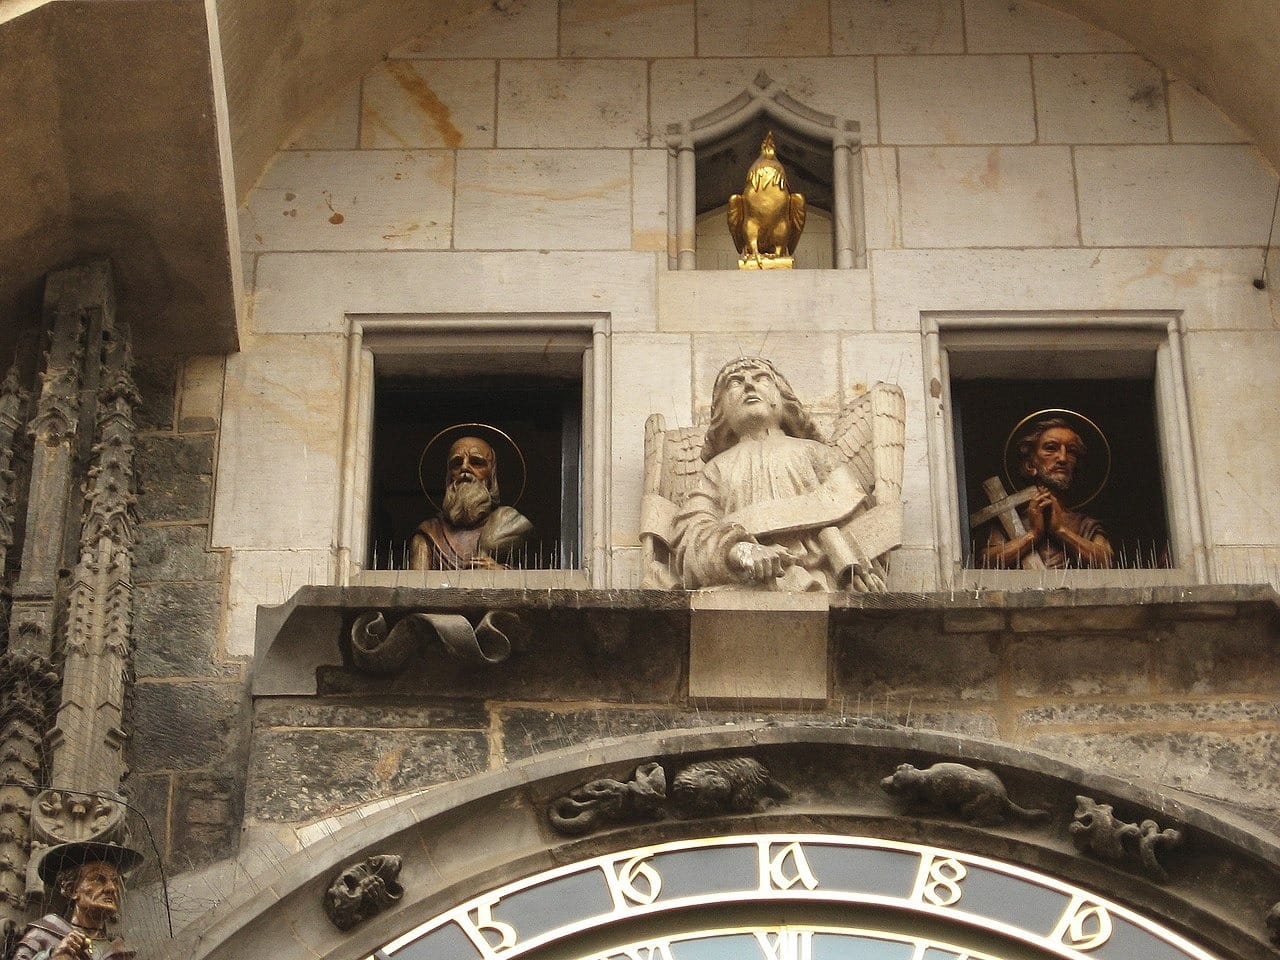 The moving statues of the apostles of Prague astronomical clock. They are the third couple: Jude Thaddaeus and Philip.